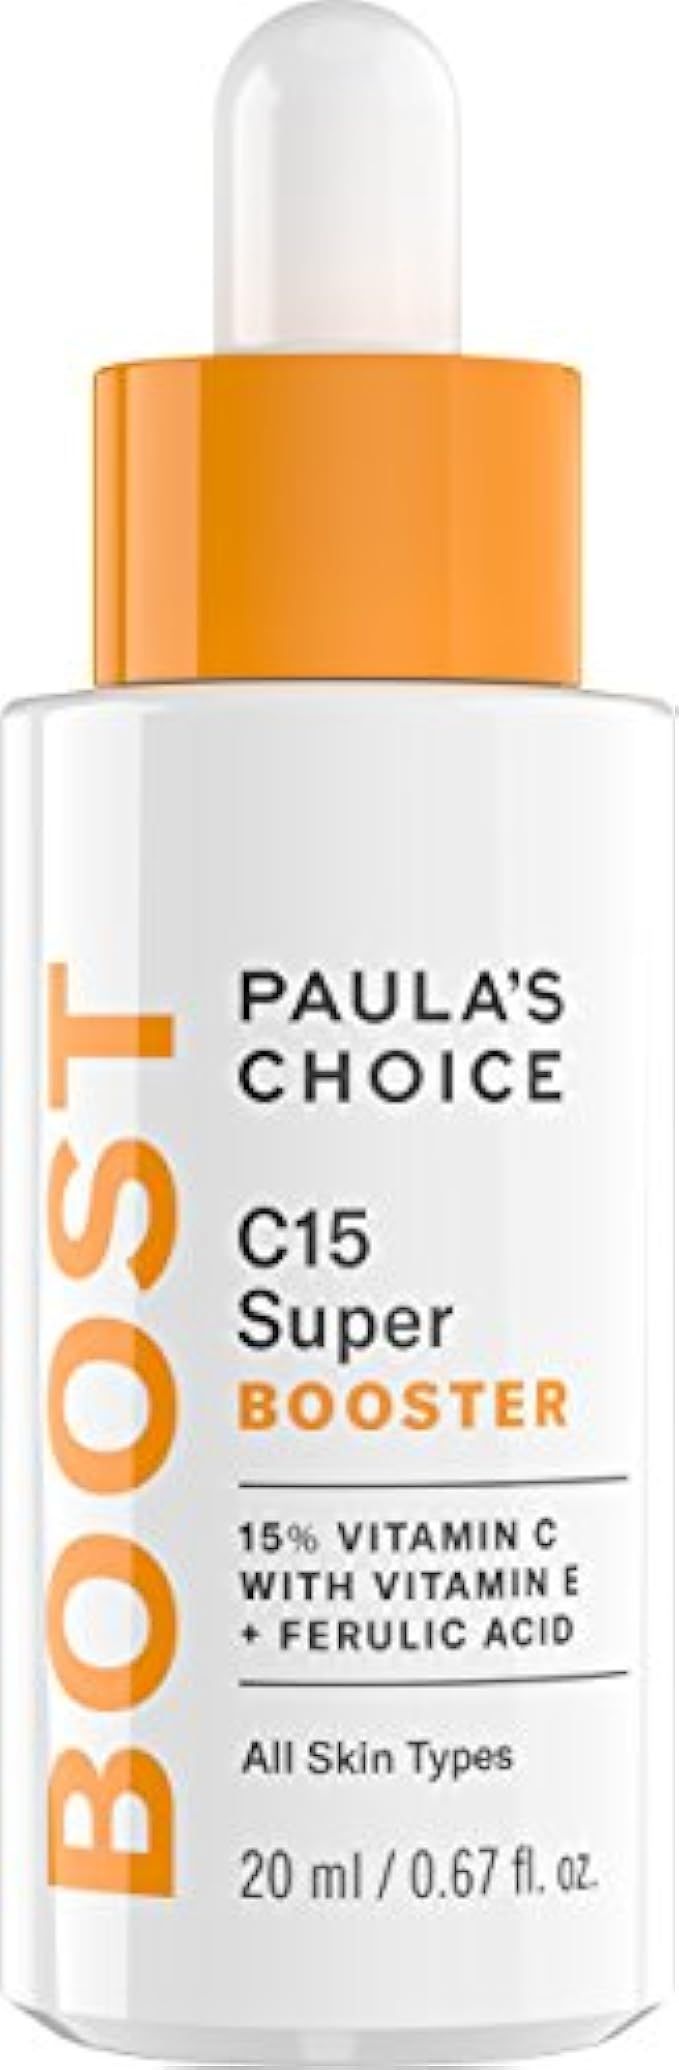 Paula's Choice BOOST C15 Super Booster 15% Vitamin C with Vitamin E and Ferulic Acid for All Skin Ty | Amazon (US)